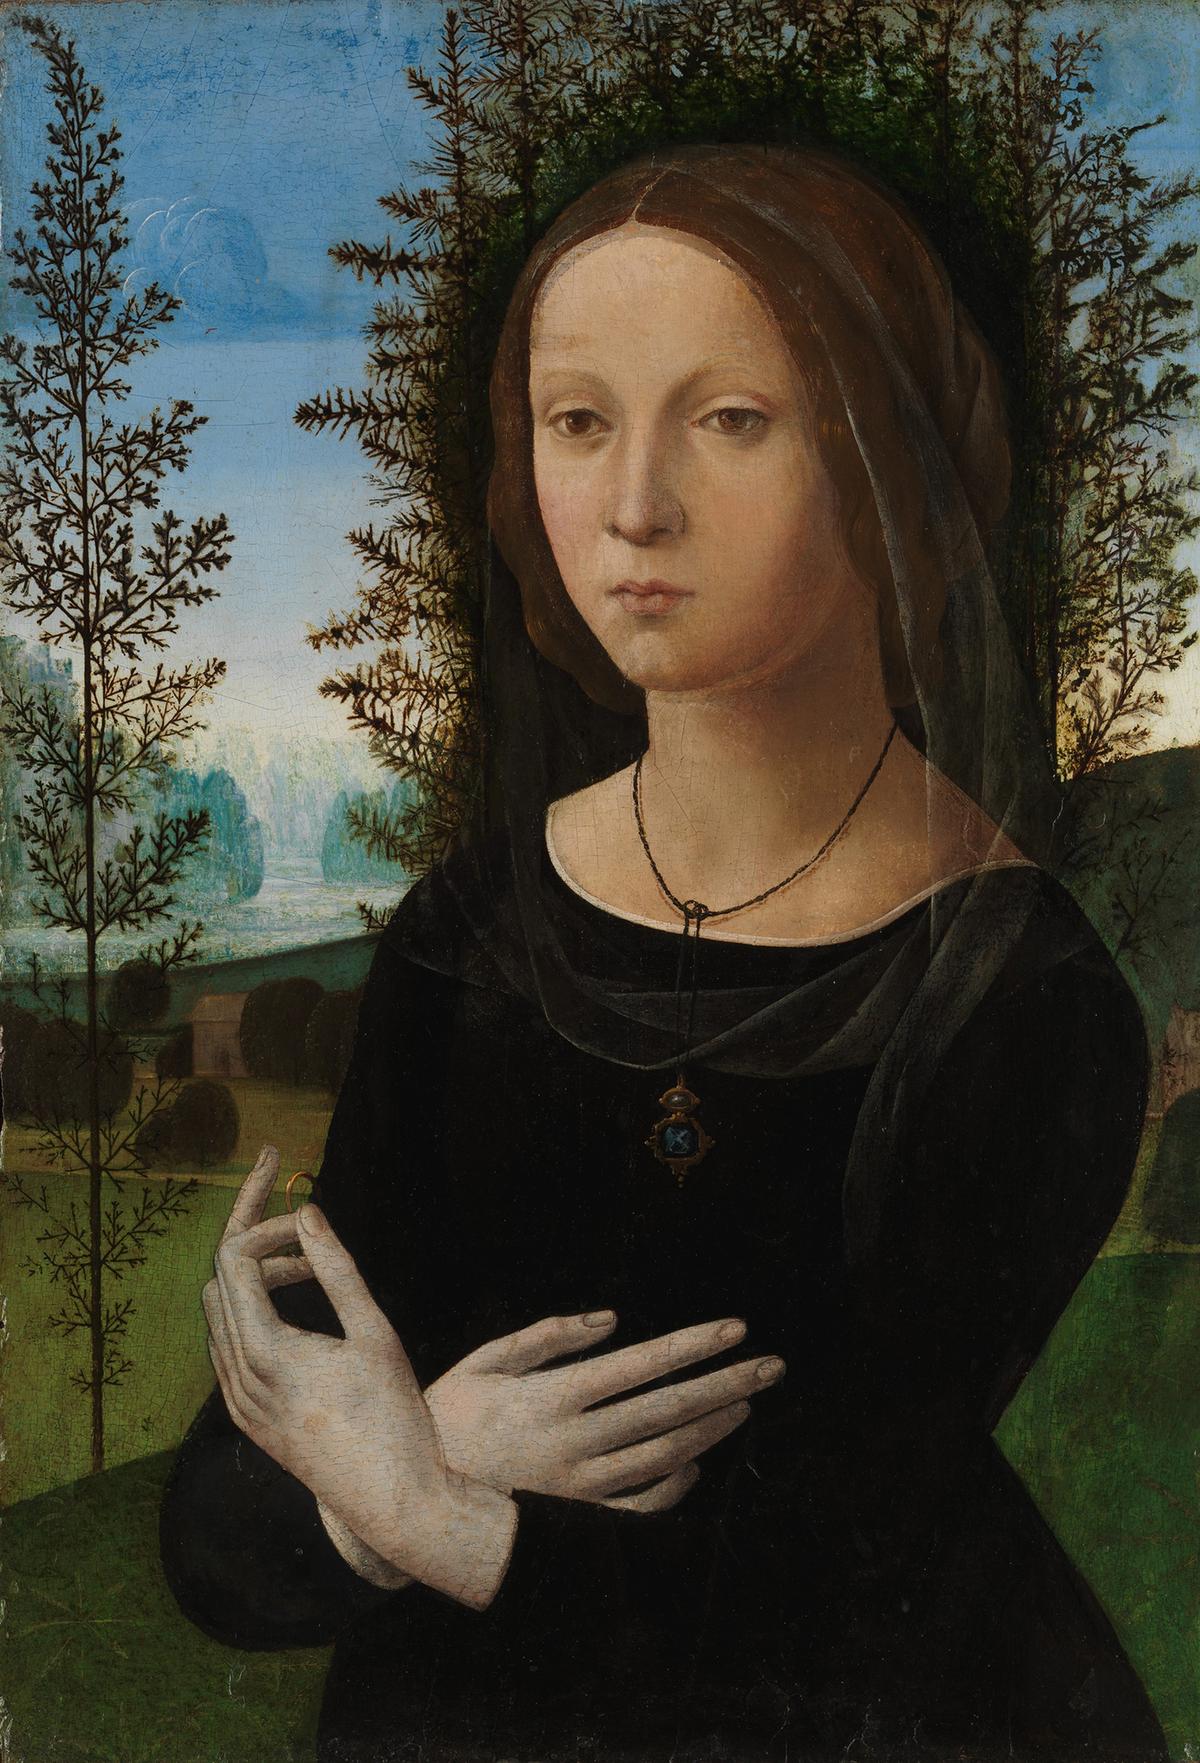 Portrait of a woman holding a gold ring, circa 1490–1500, by Lorenzo di Credi. Oil on wood. The Metropolitan Museum of Art, New York City. (Public Domain)